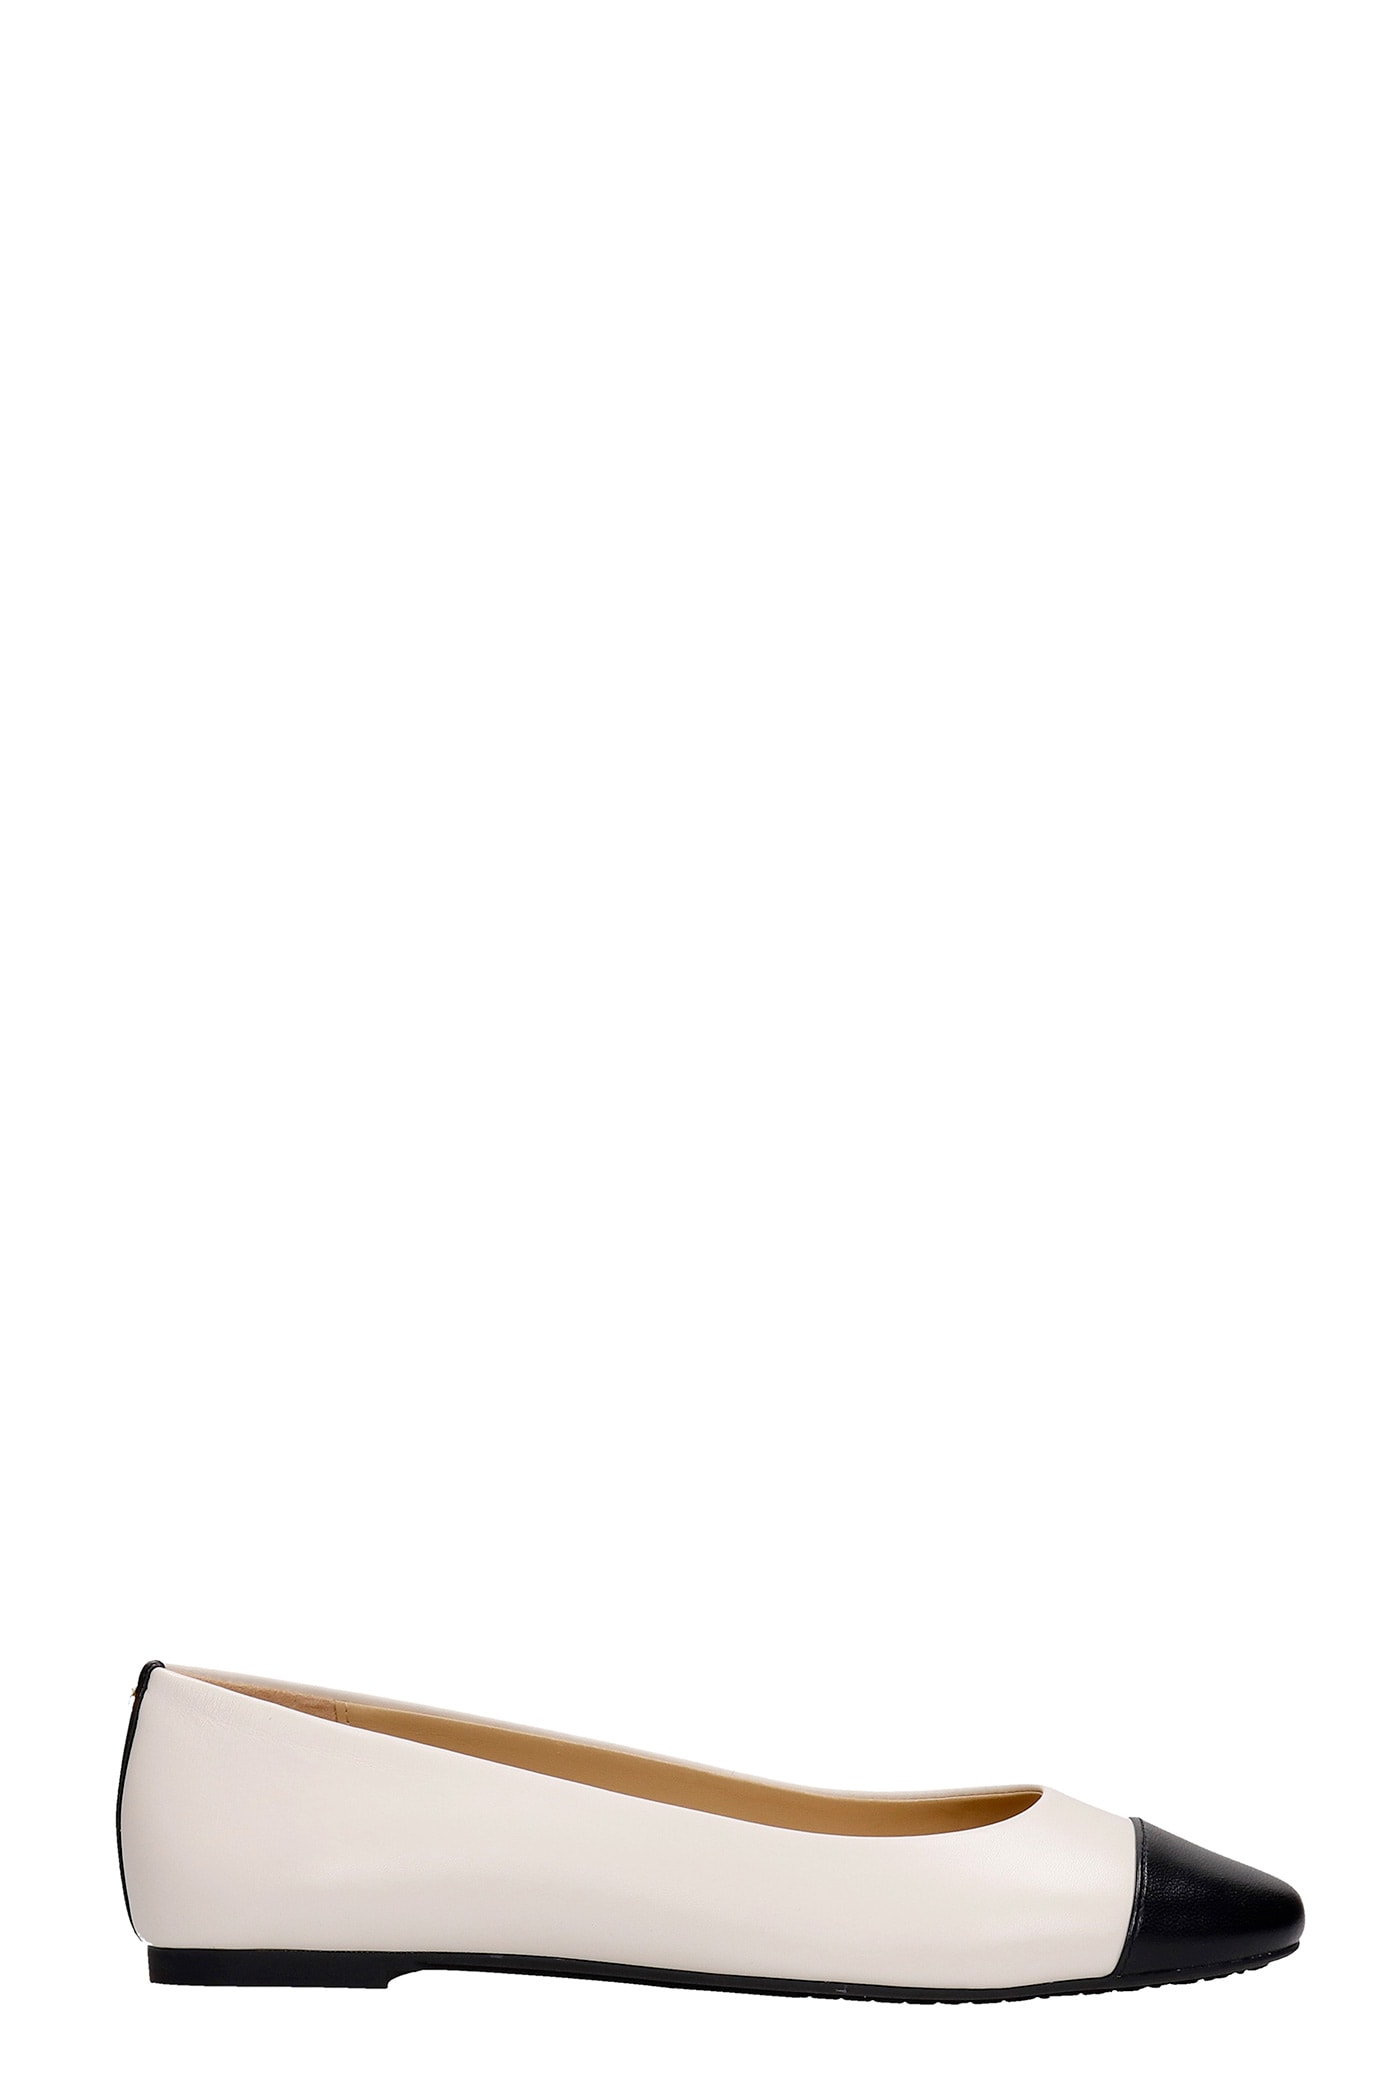 Buy Michael Kors Alyssa Ballet Flats In Beige Leather online, shop Michael Kors shoes with free shipping